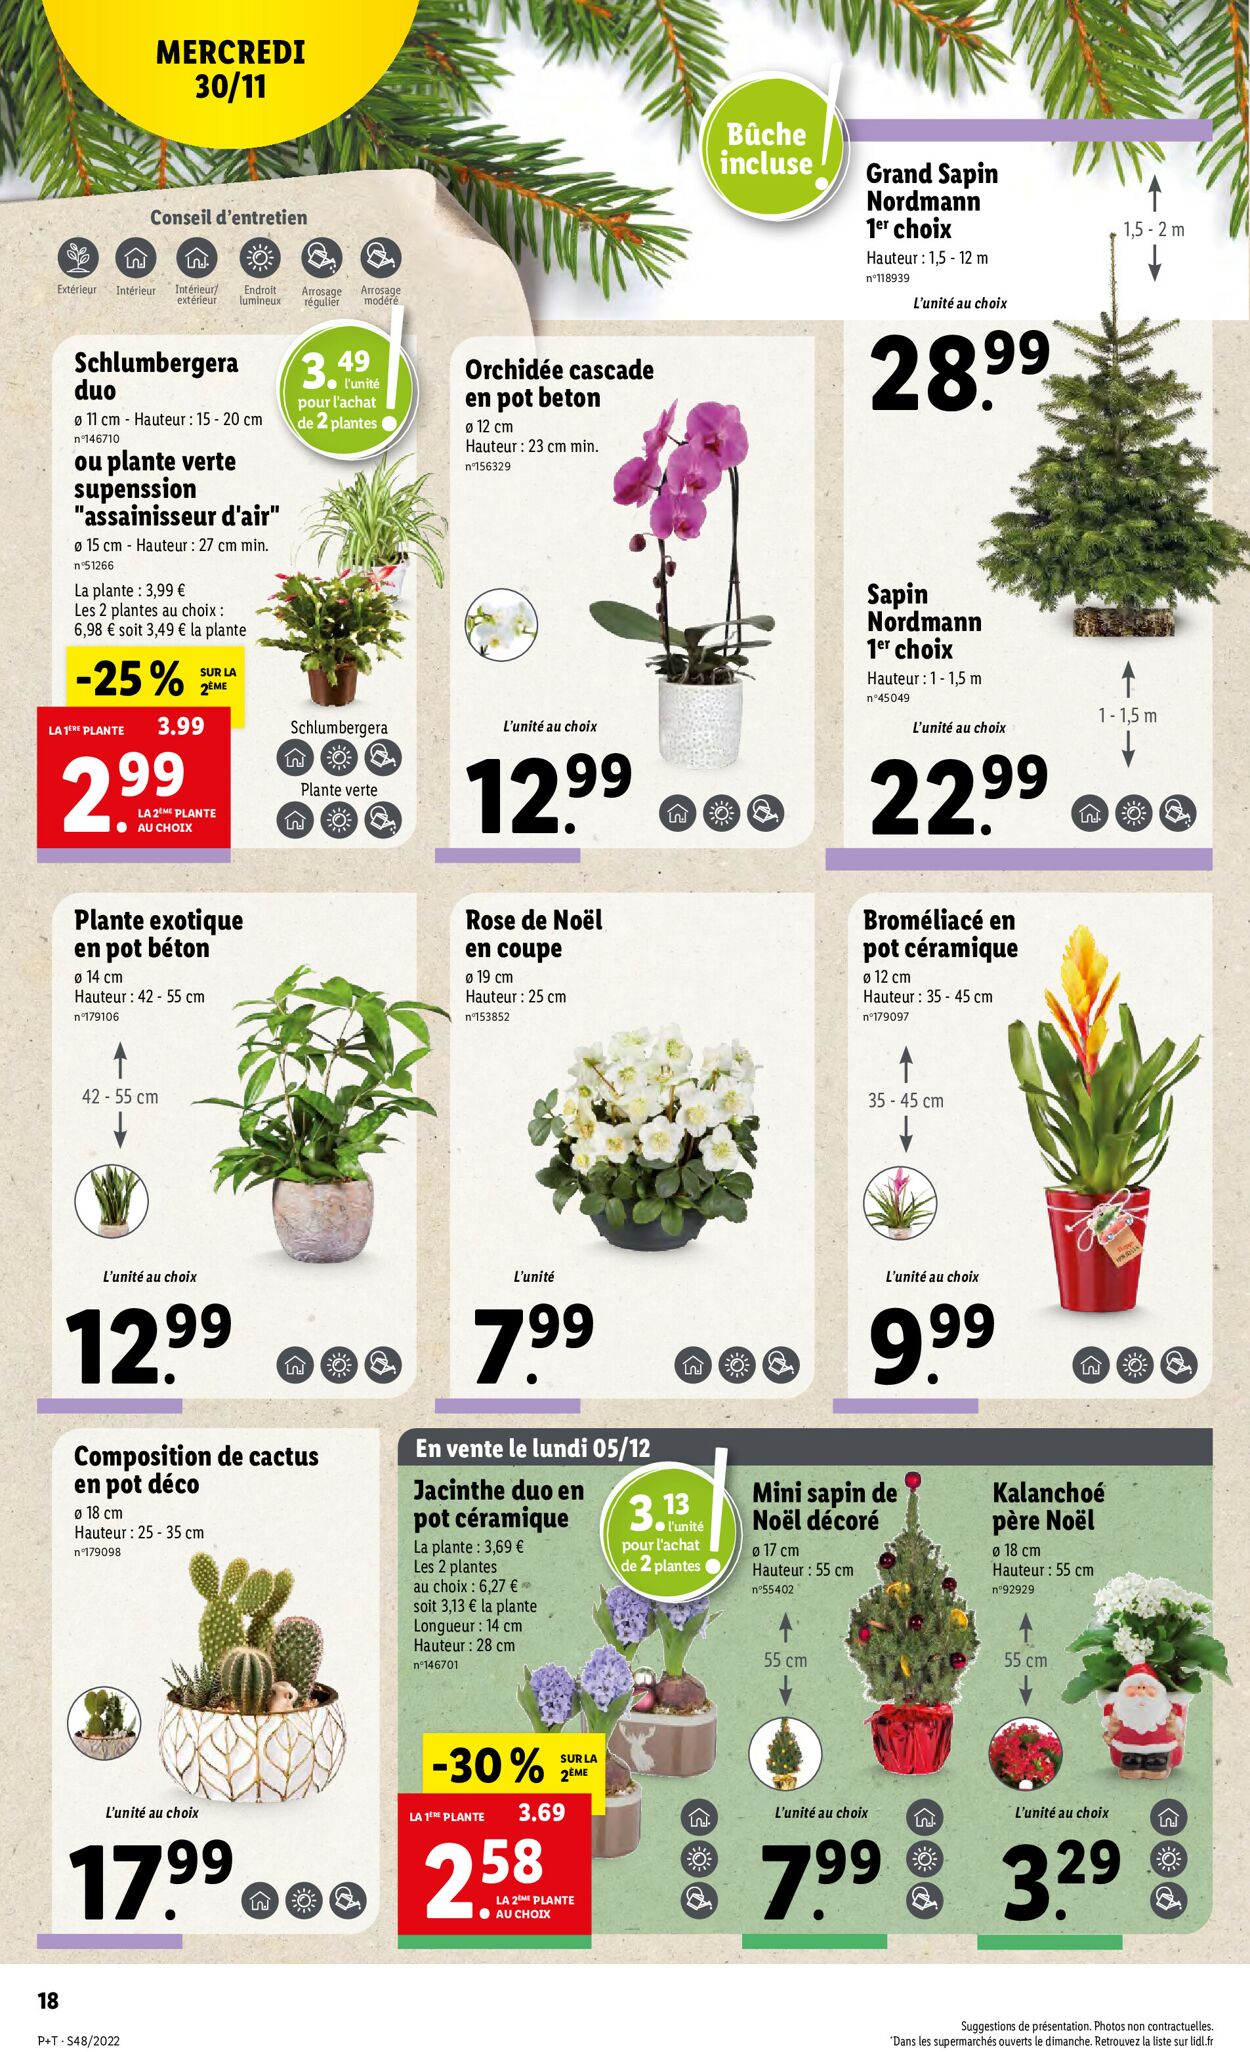 Lidl Catalogue - 30.11-06.12.2022 (Page 18)